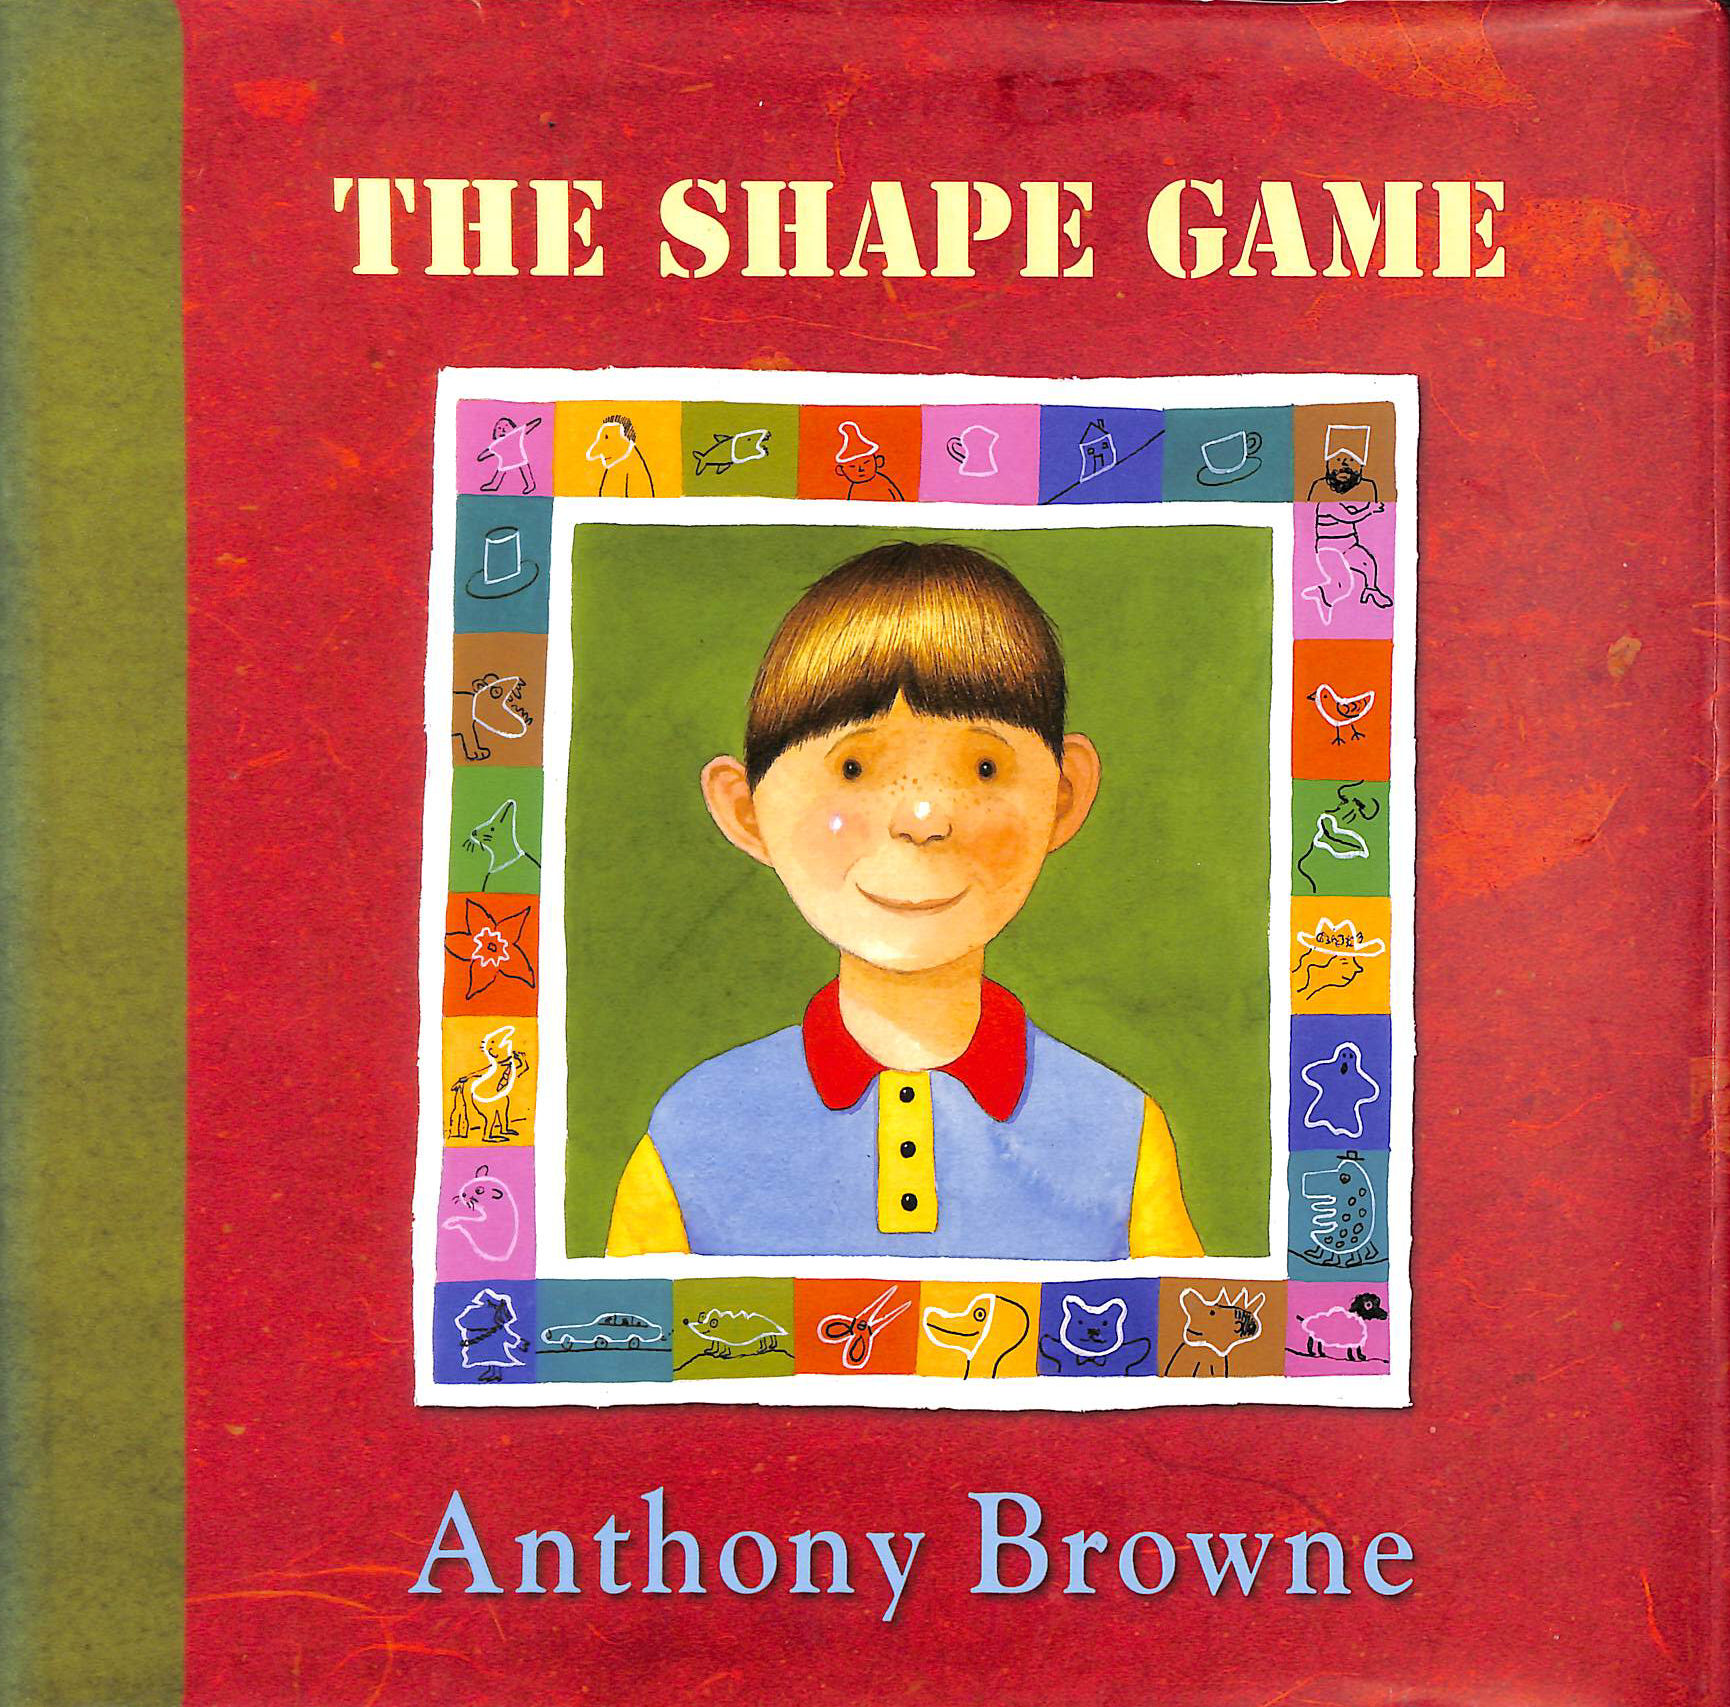 BROWNE, ANTHONY - The Shape Game